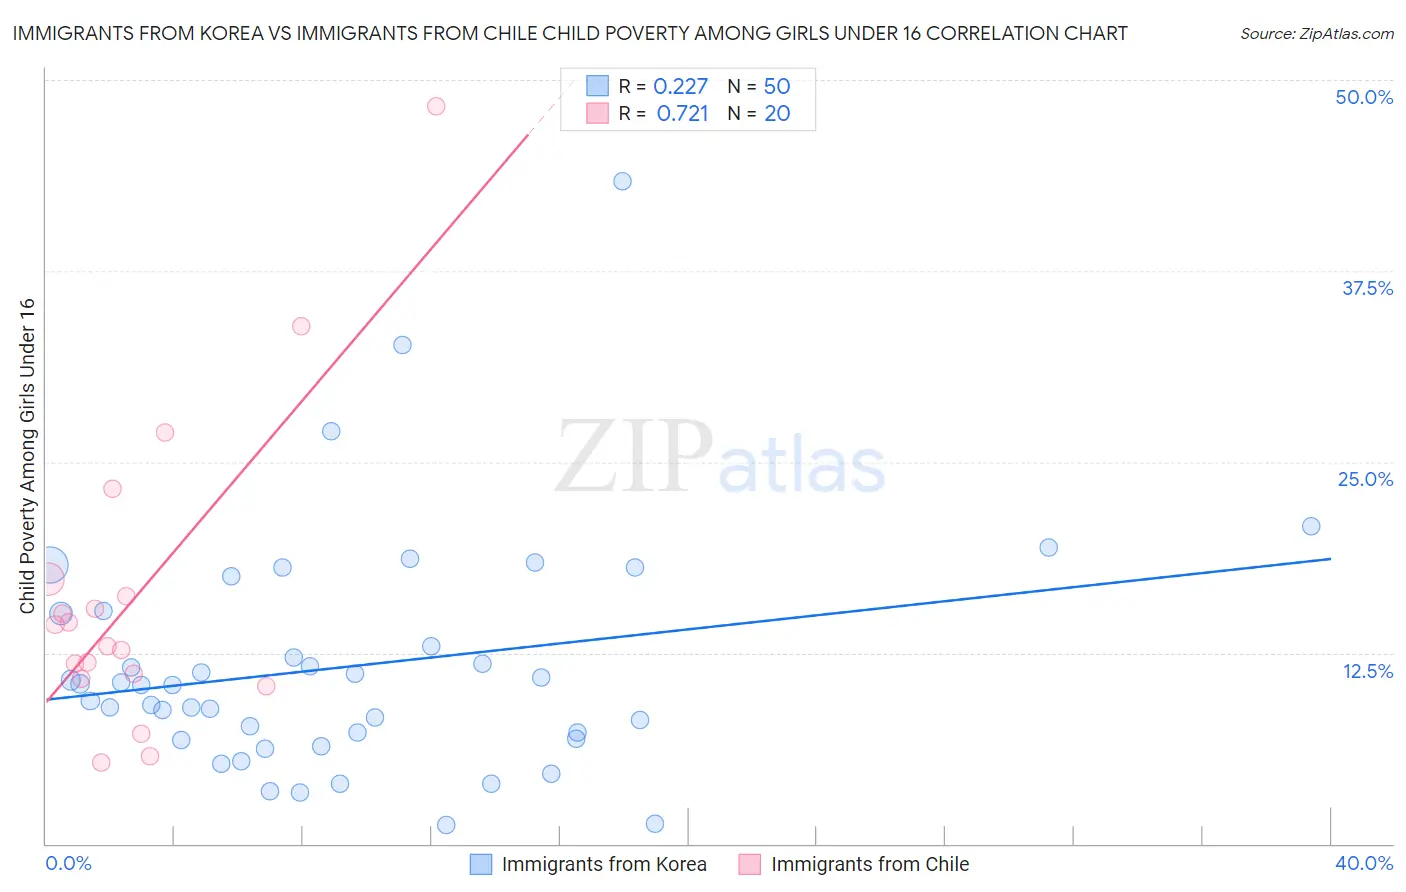 Immigrants from Korea vs Immigrants from Chile Child Poverty Among Girls Under 16